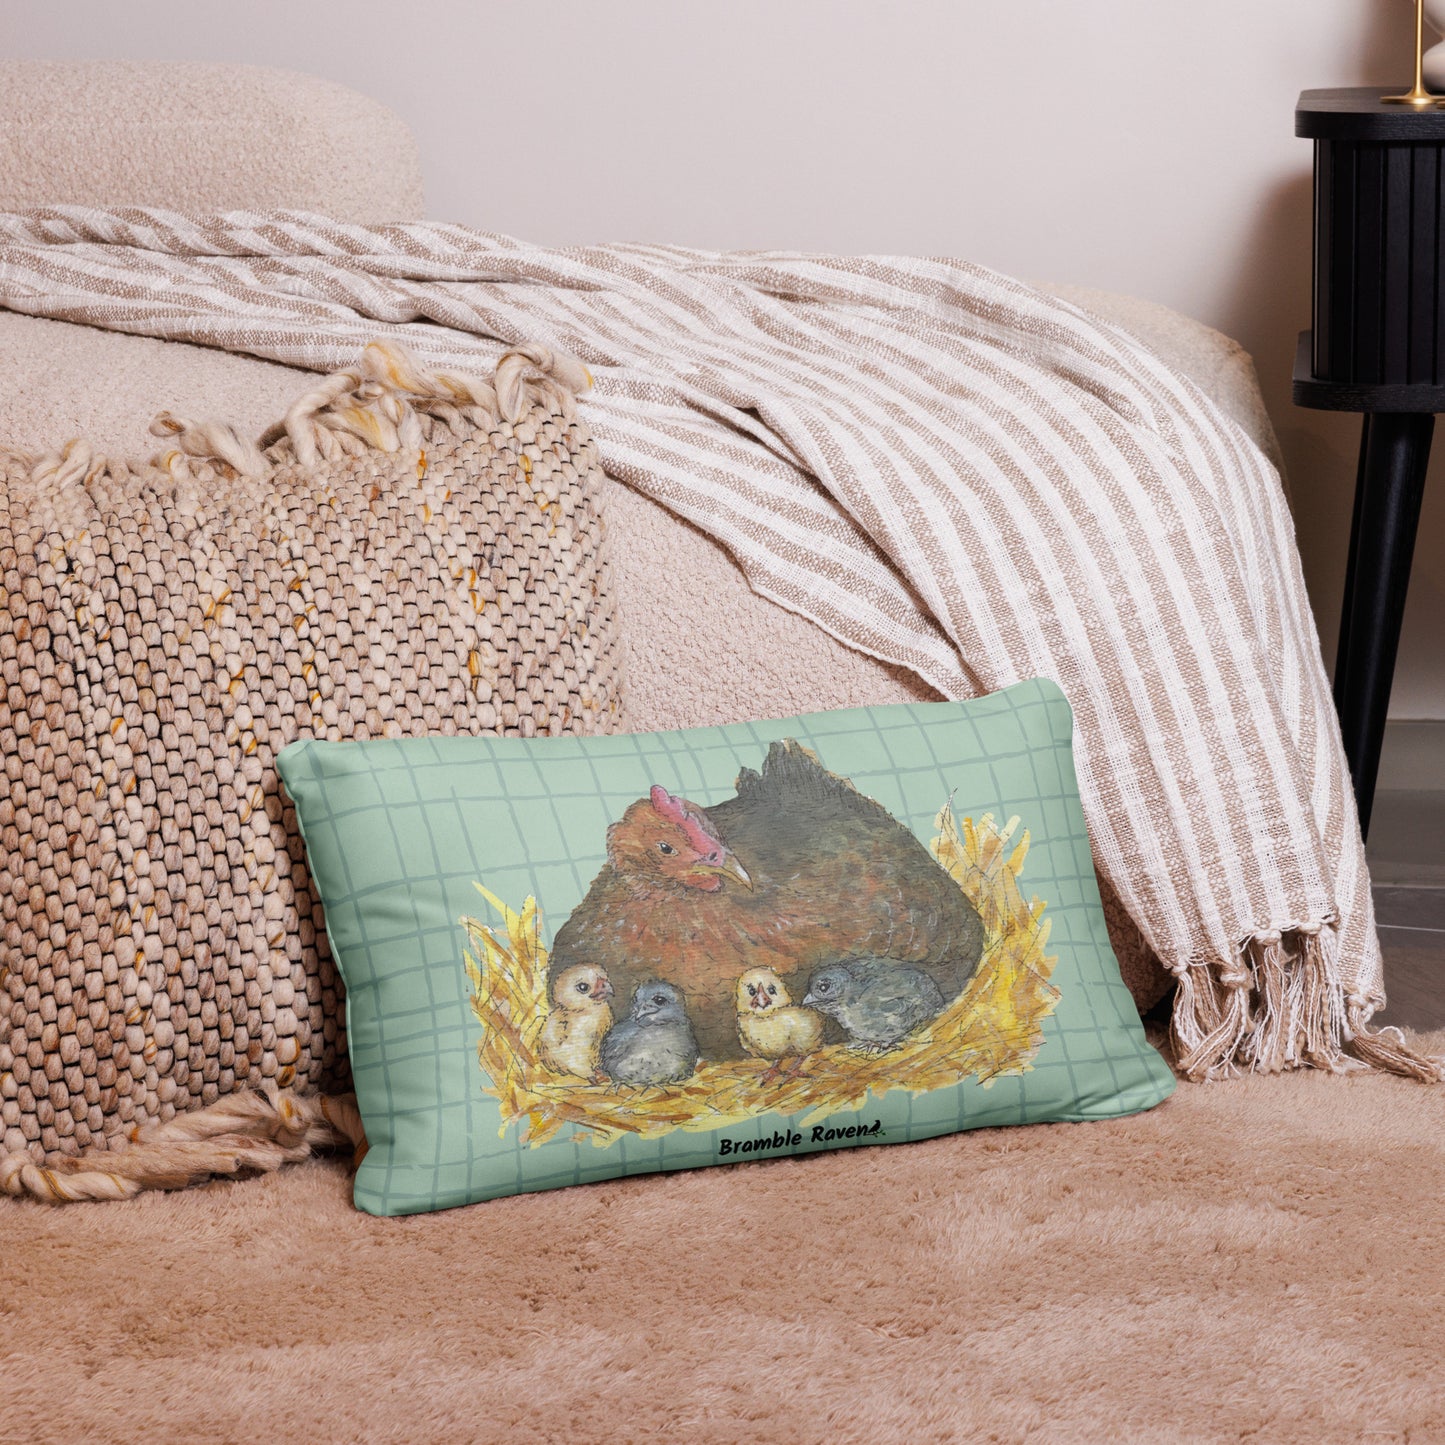 20 by 12 inch mother hen decorative throw pillow. Features Heather Silver's watercolor print of a mother hen and chicks on a green cross-hatched background. Image printed on both sides. Has a hidden zipper and washable cover. Comes with shape-retaining insert. Shown on tan carpet by beige bed.